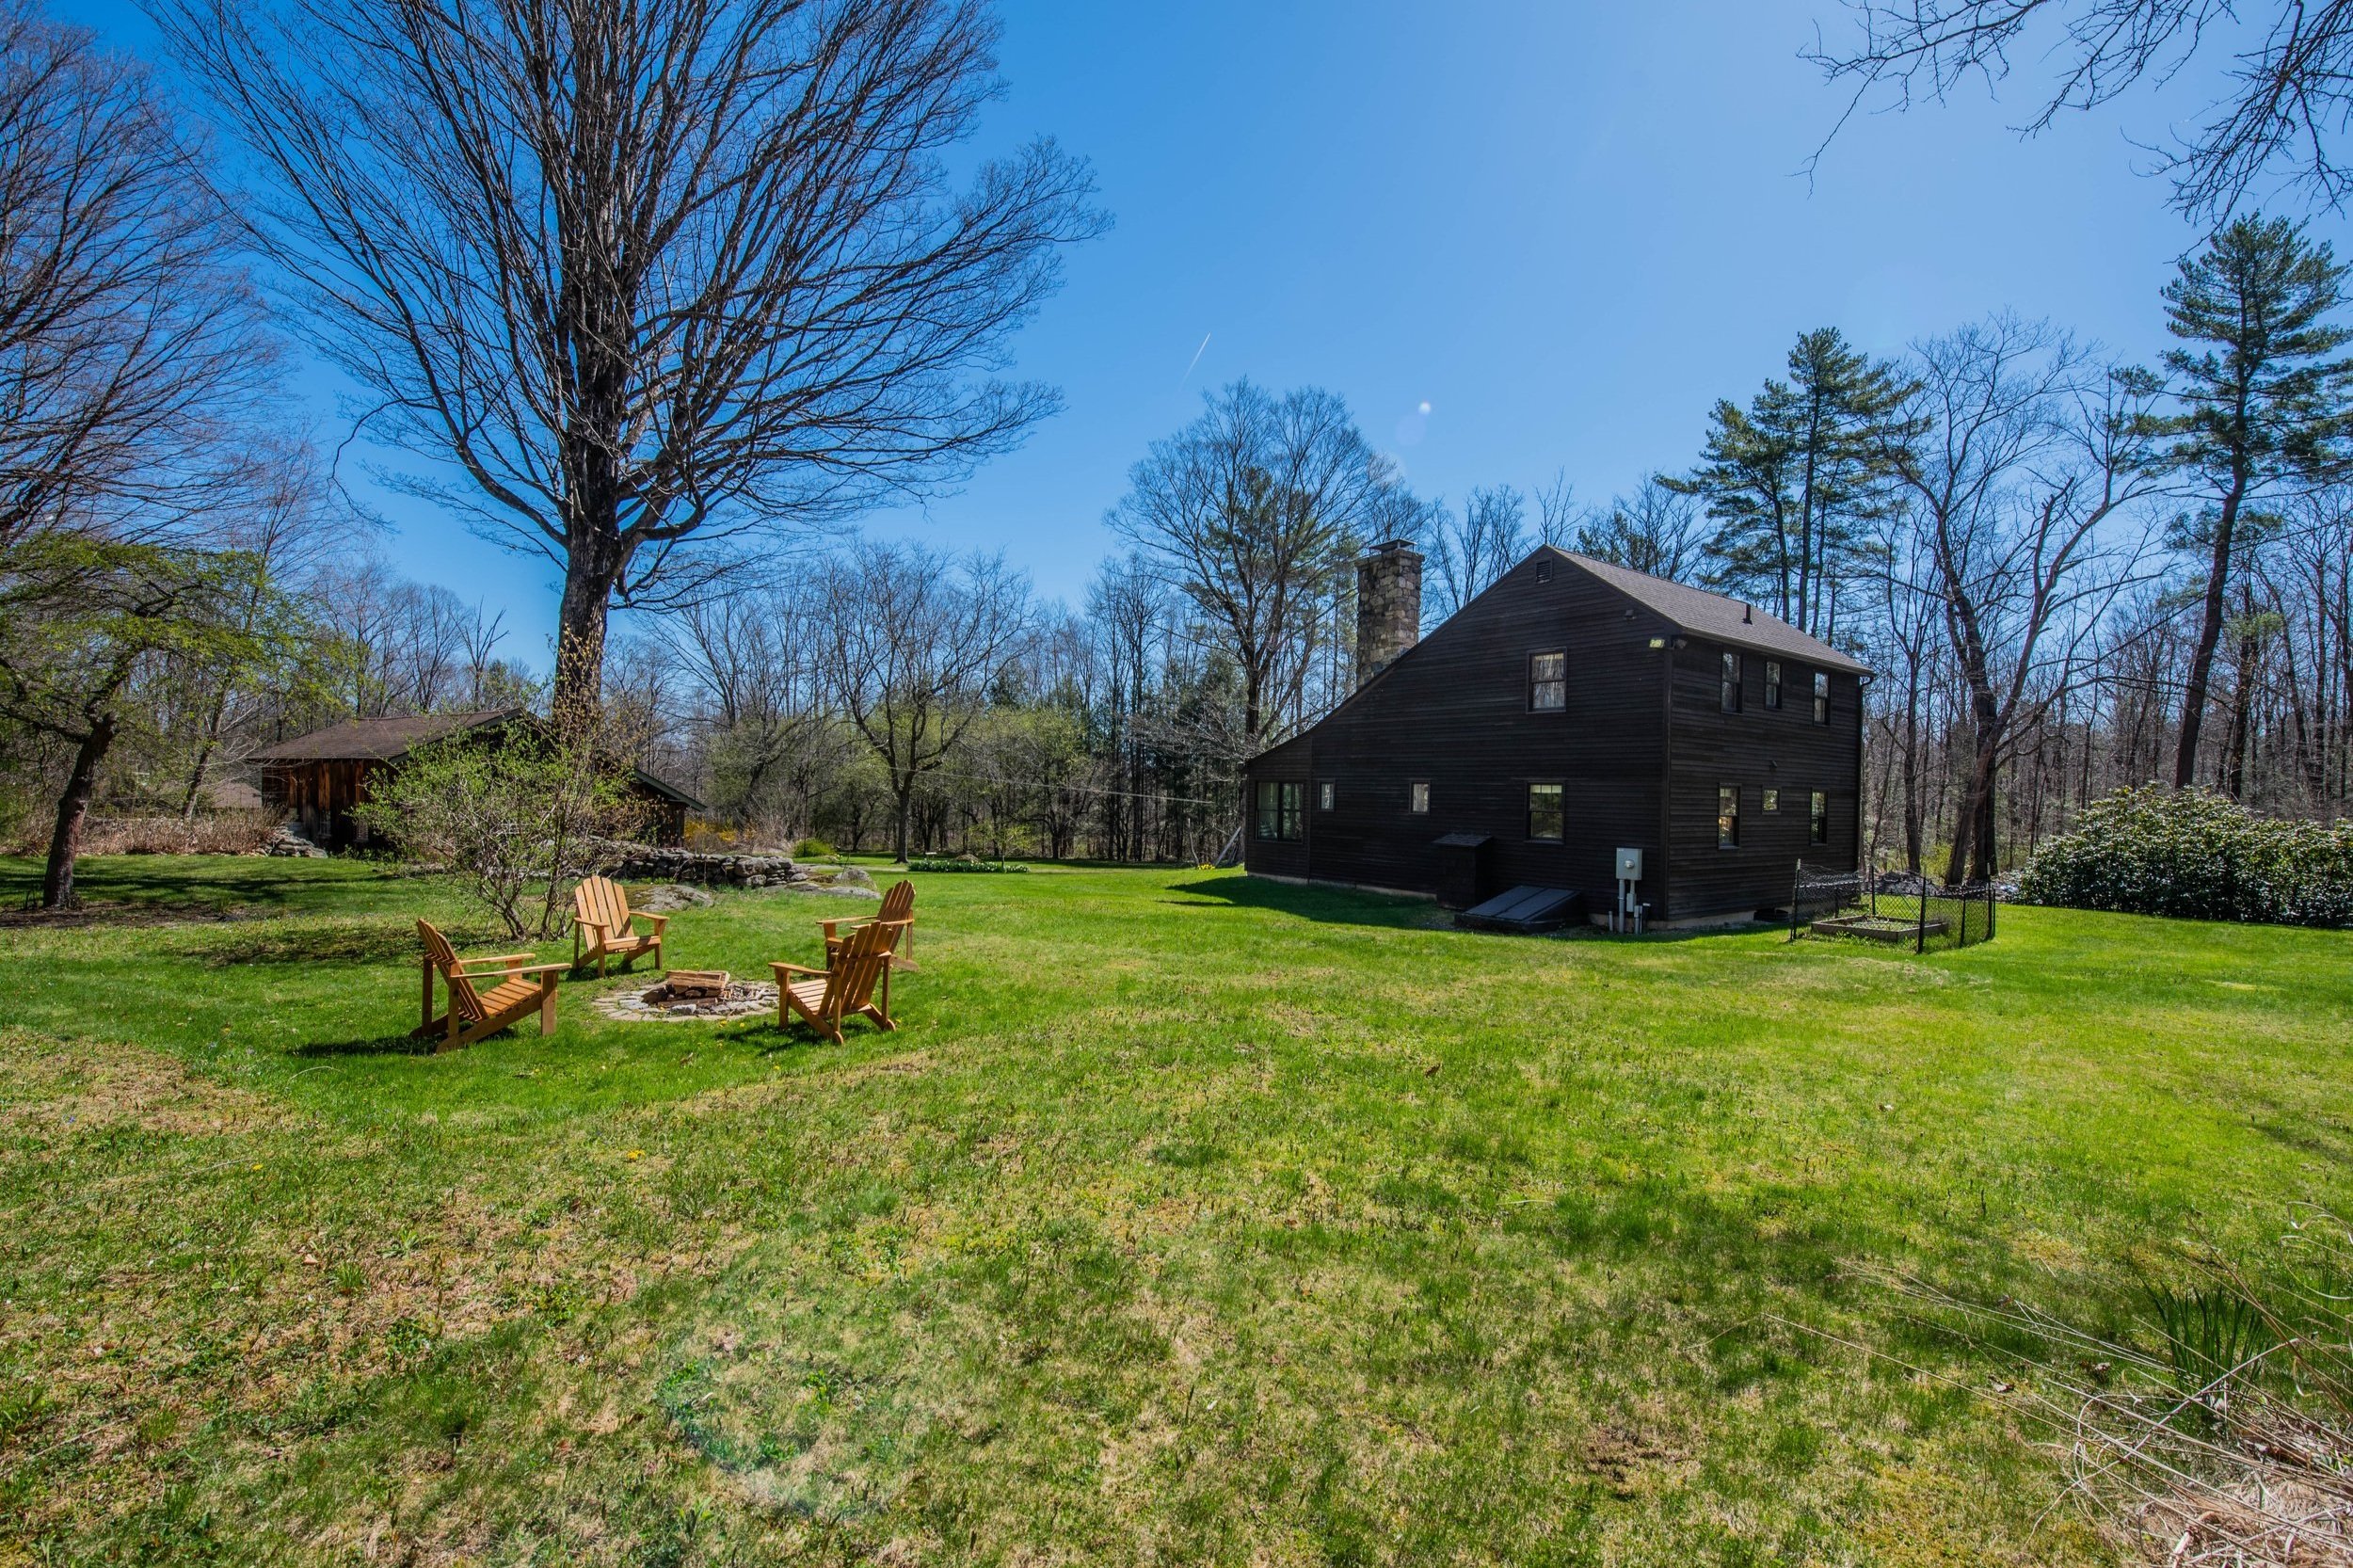 Home for sale in Litchfield Co., CT